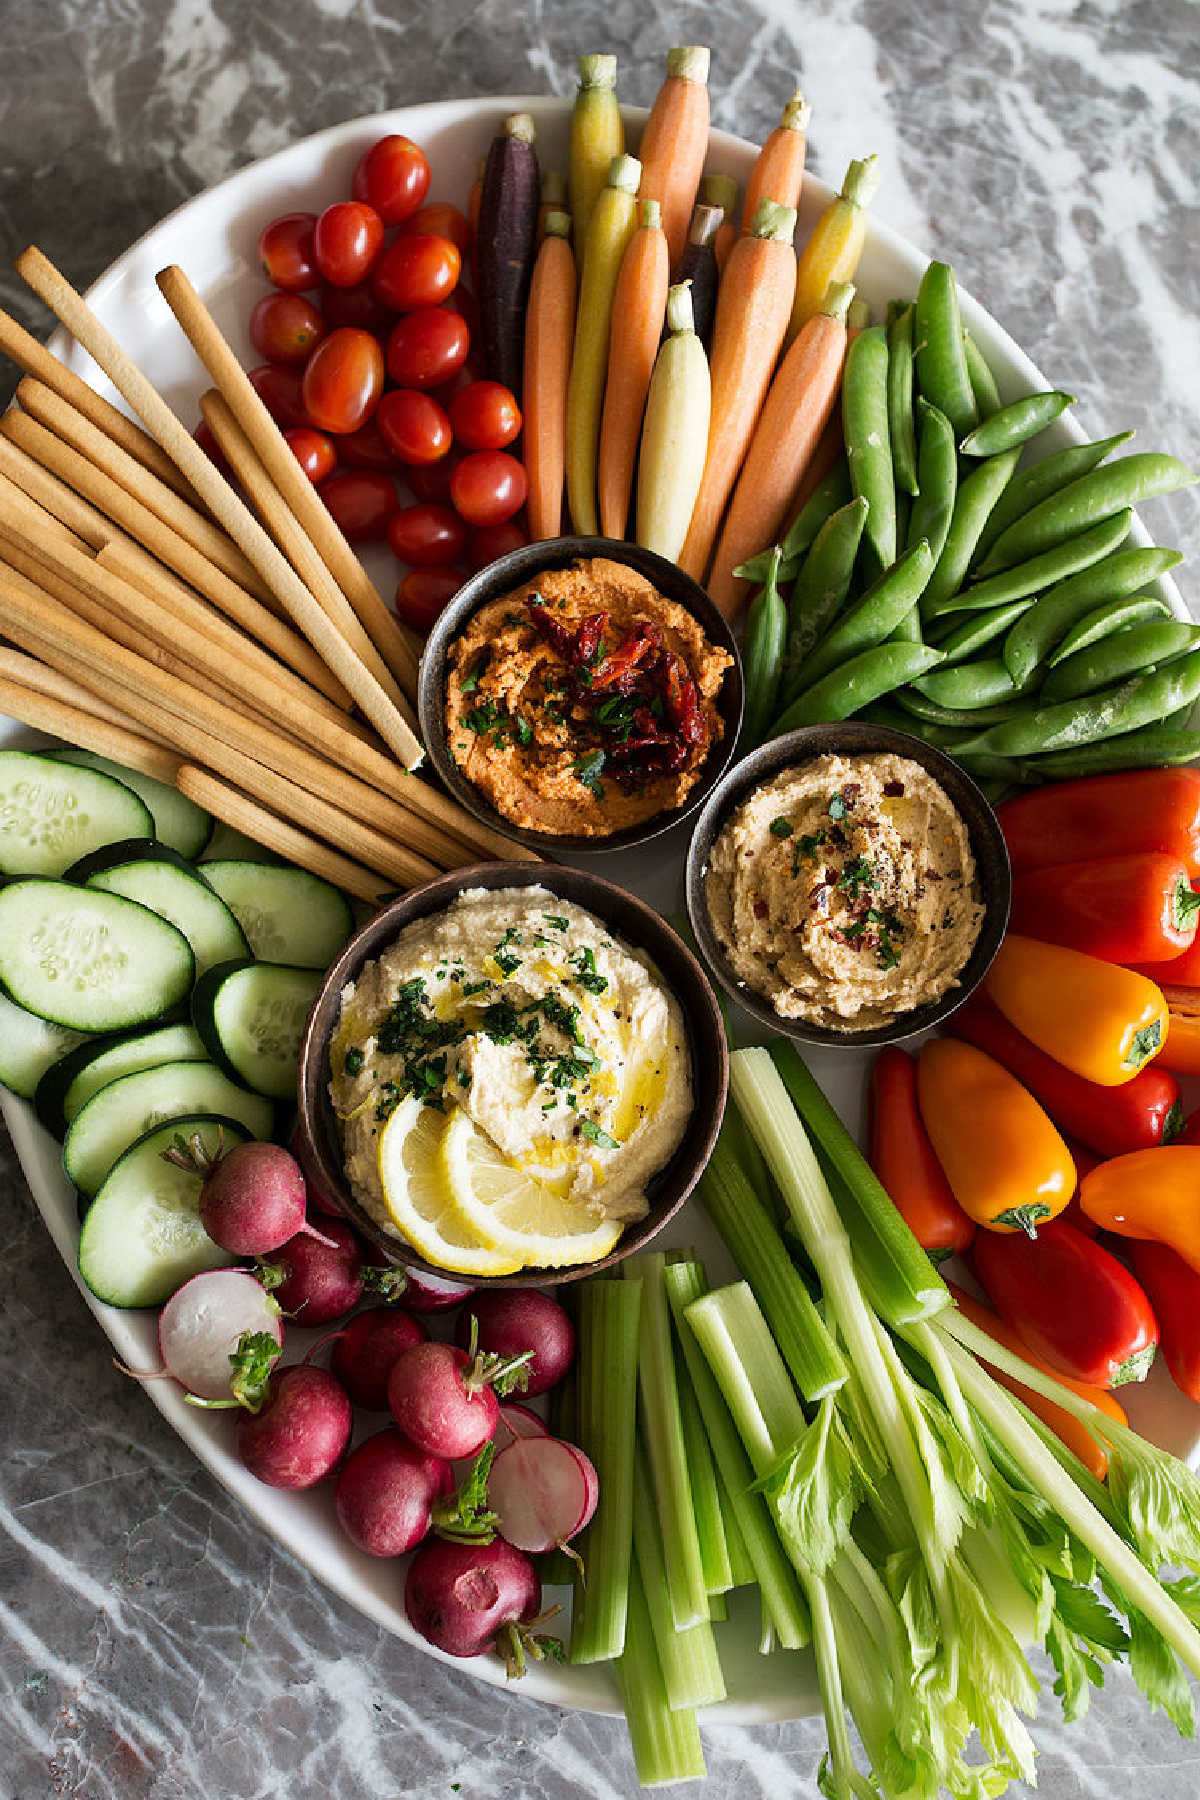 Vegetable Crudites with Hummus - a tasty and cheap party food idea